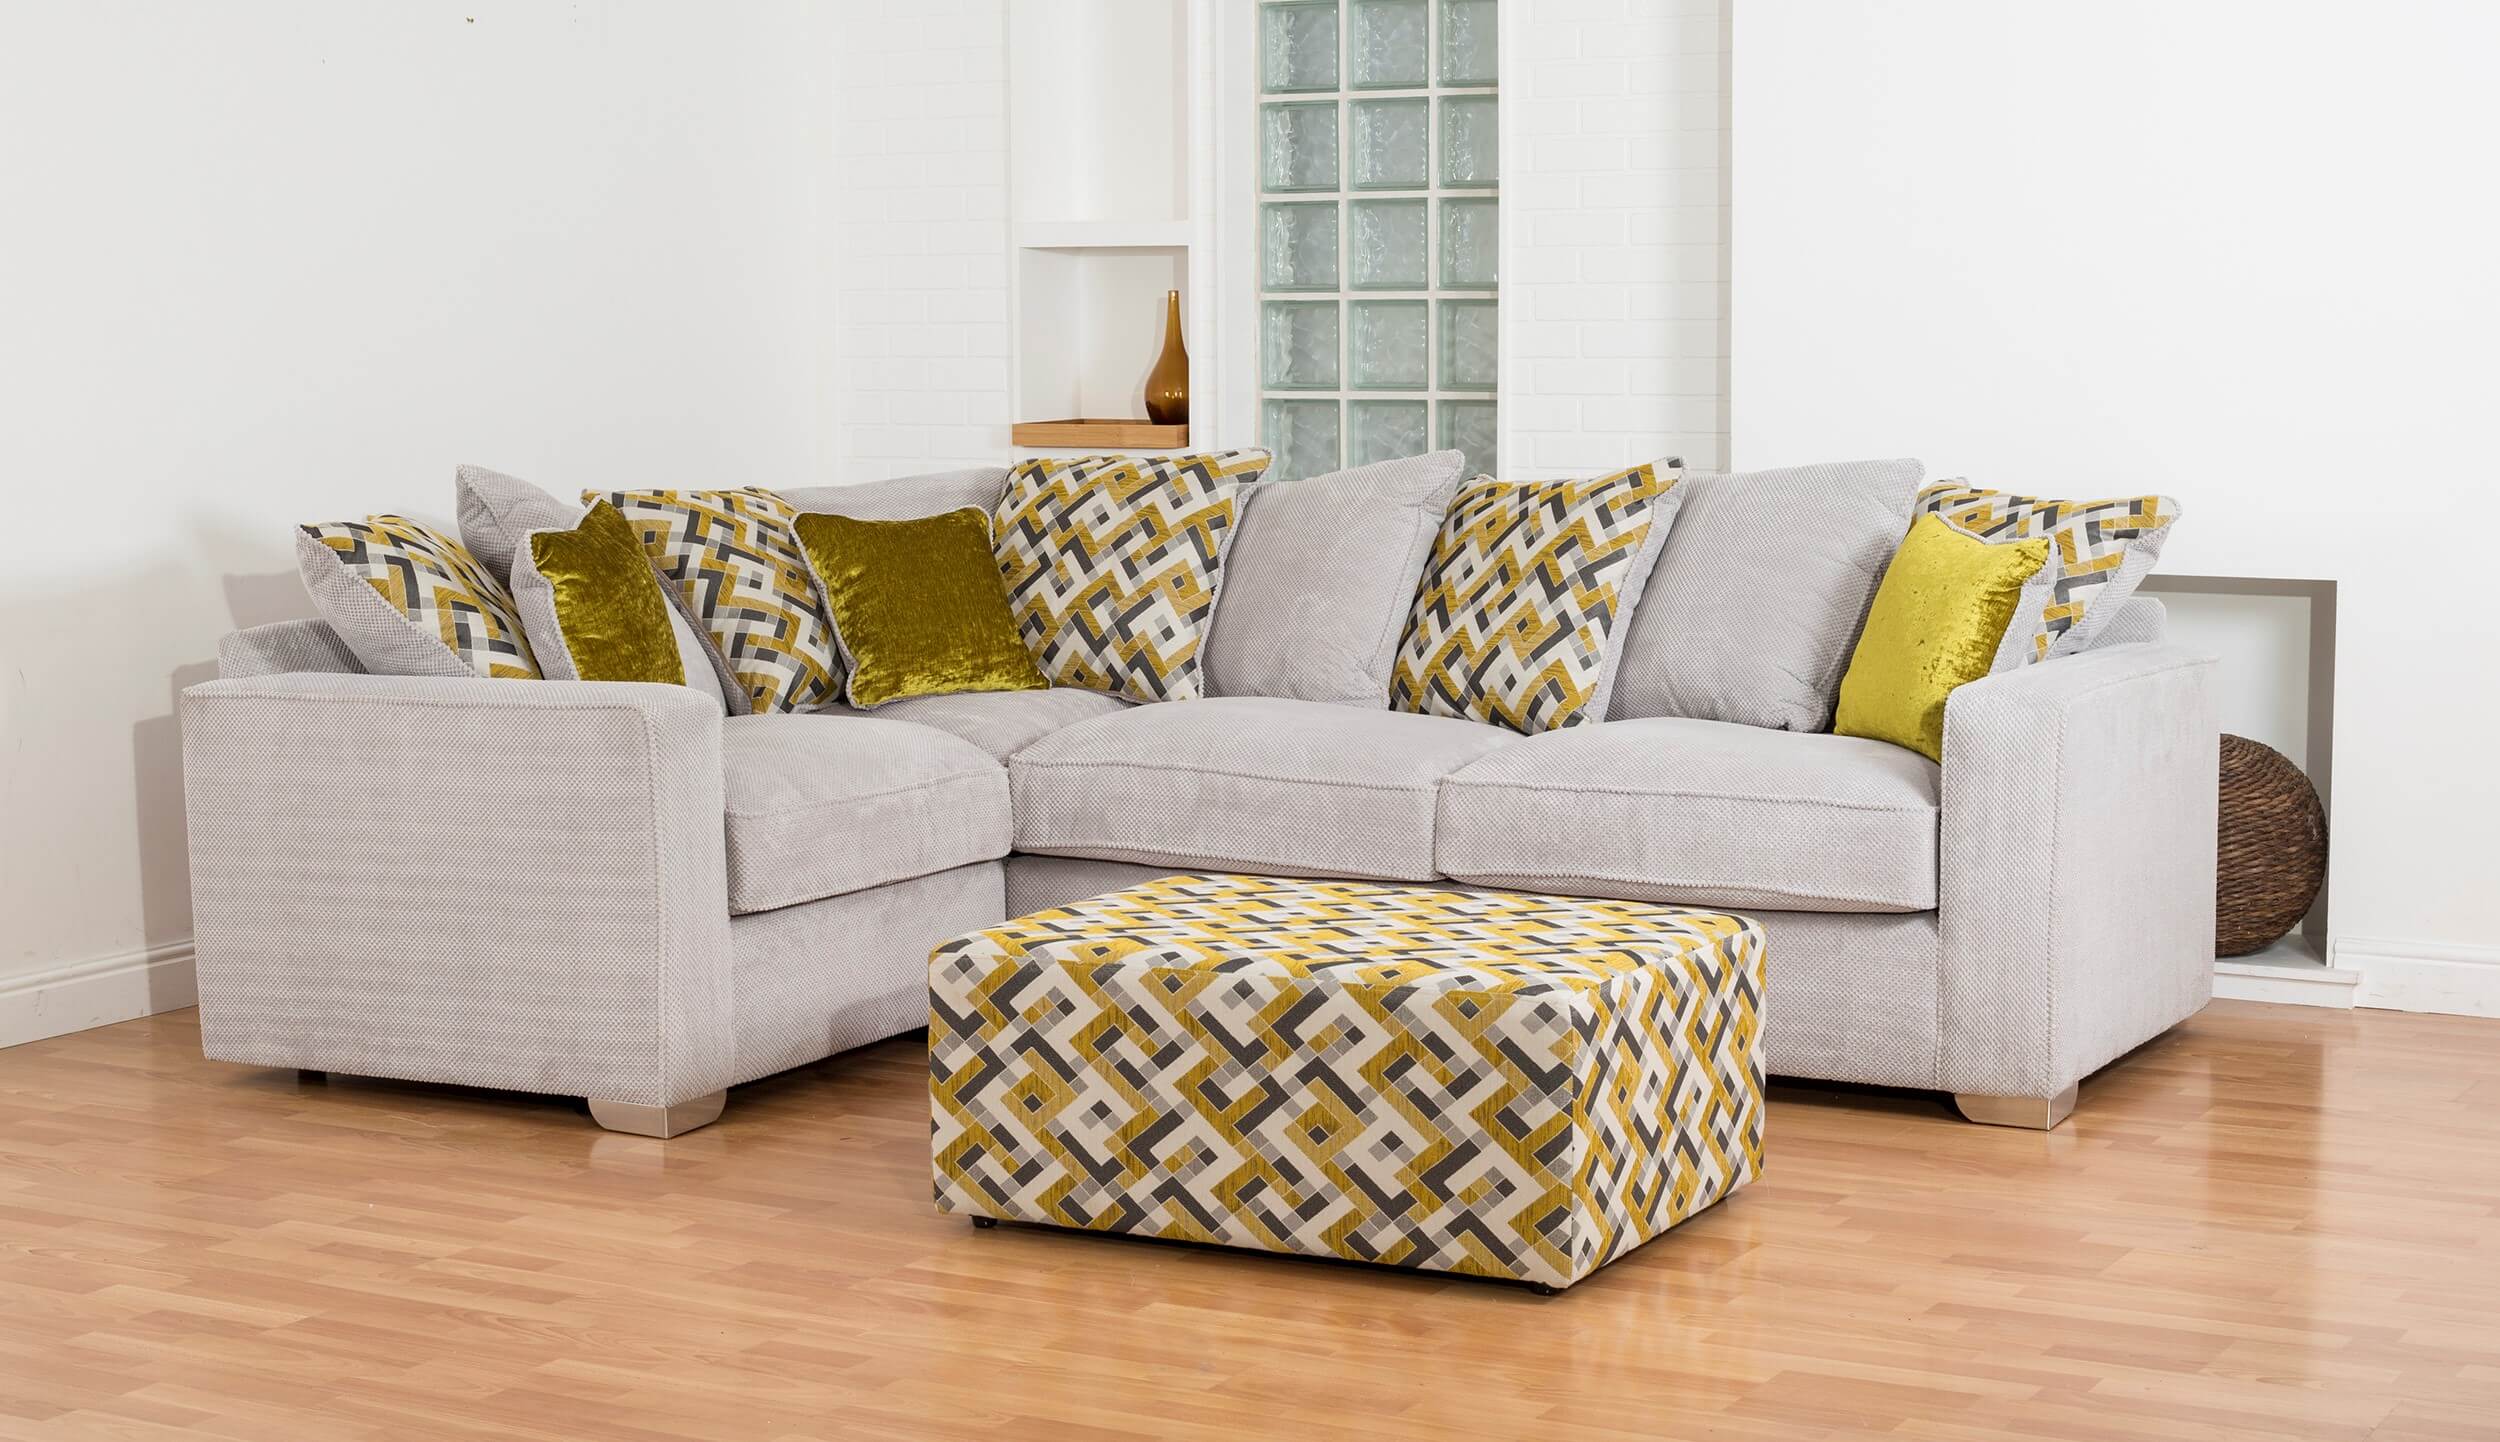 Showing image for Montpellier right-hand corner sofa set